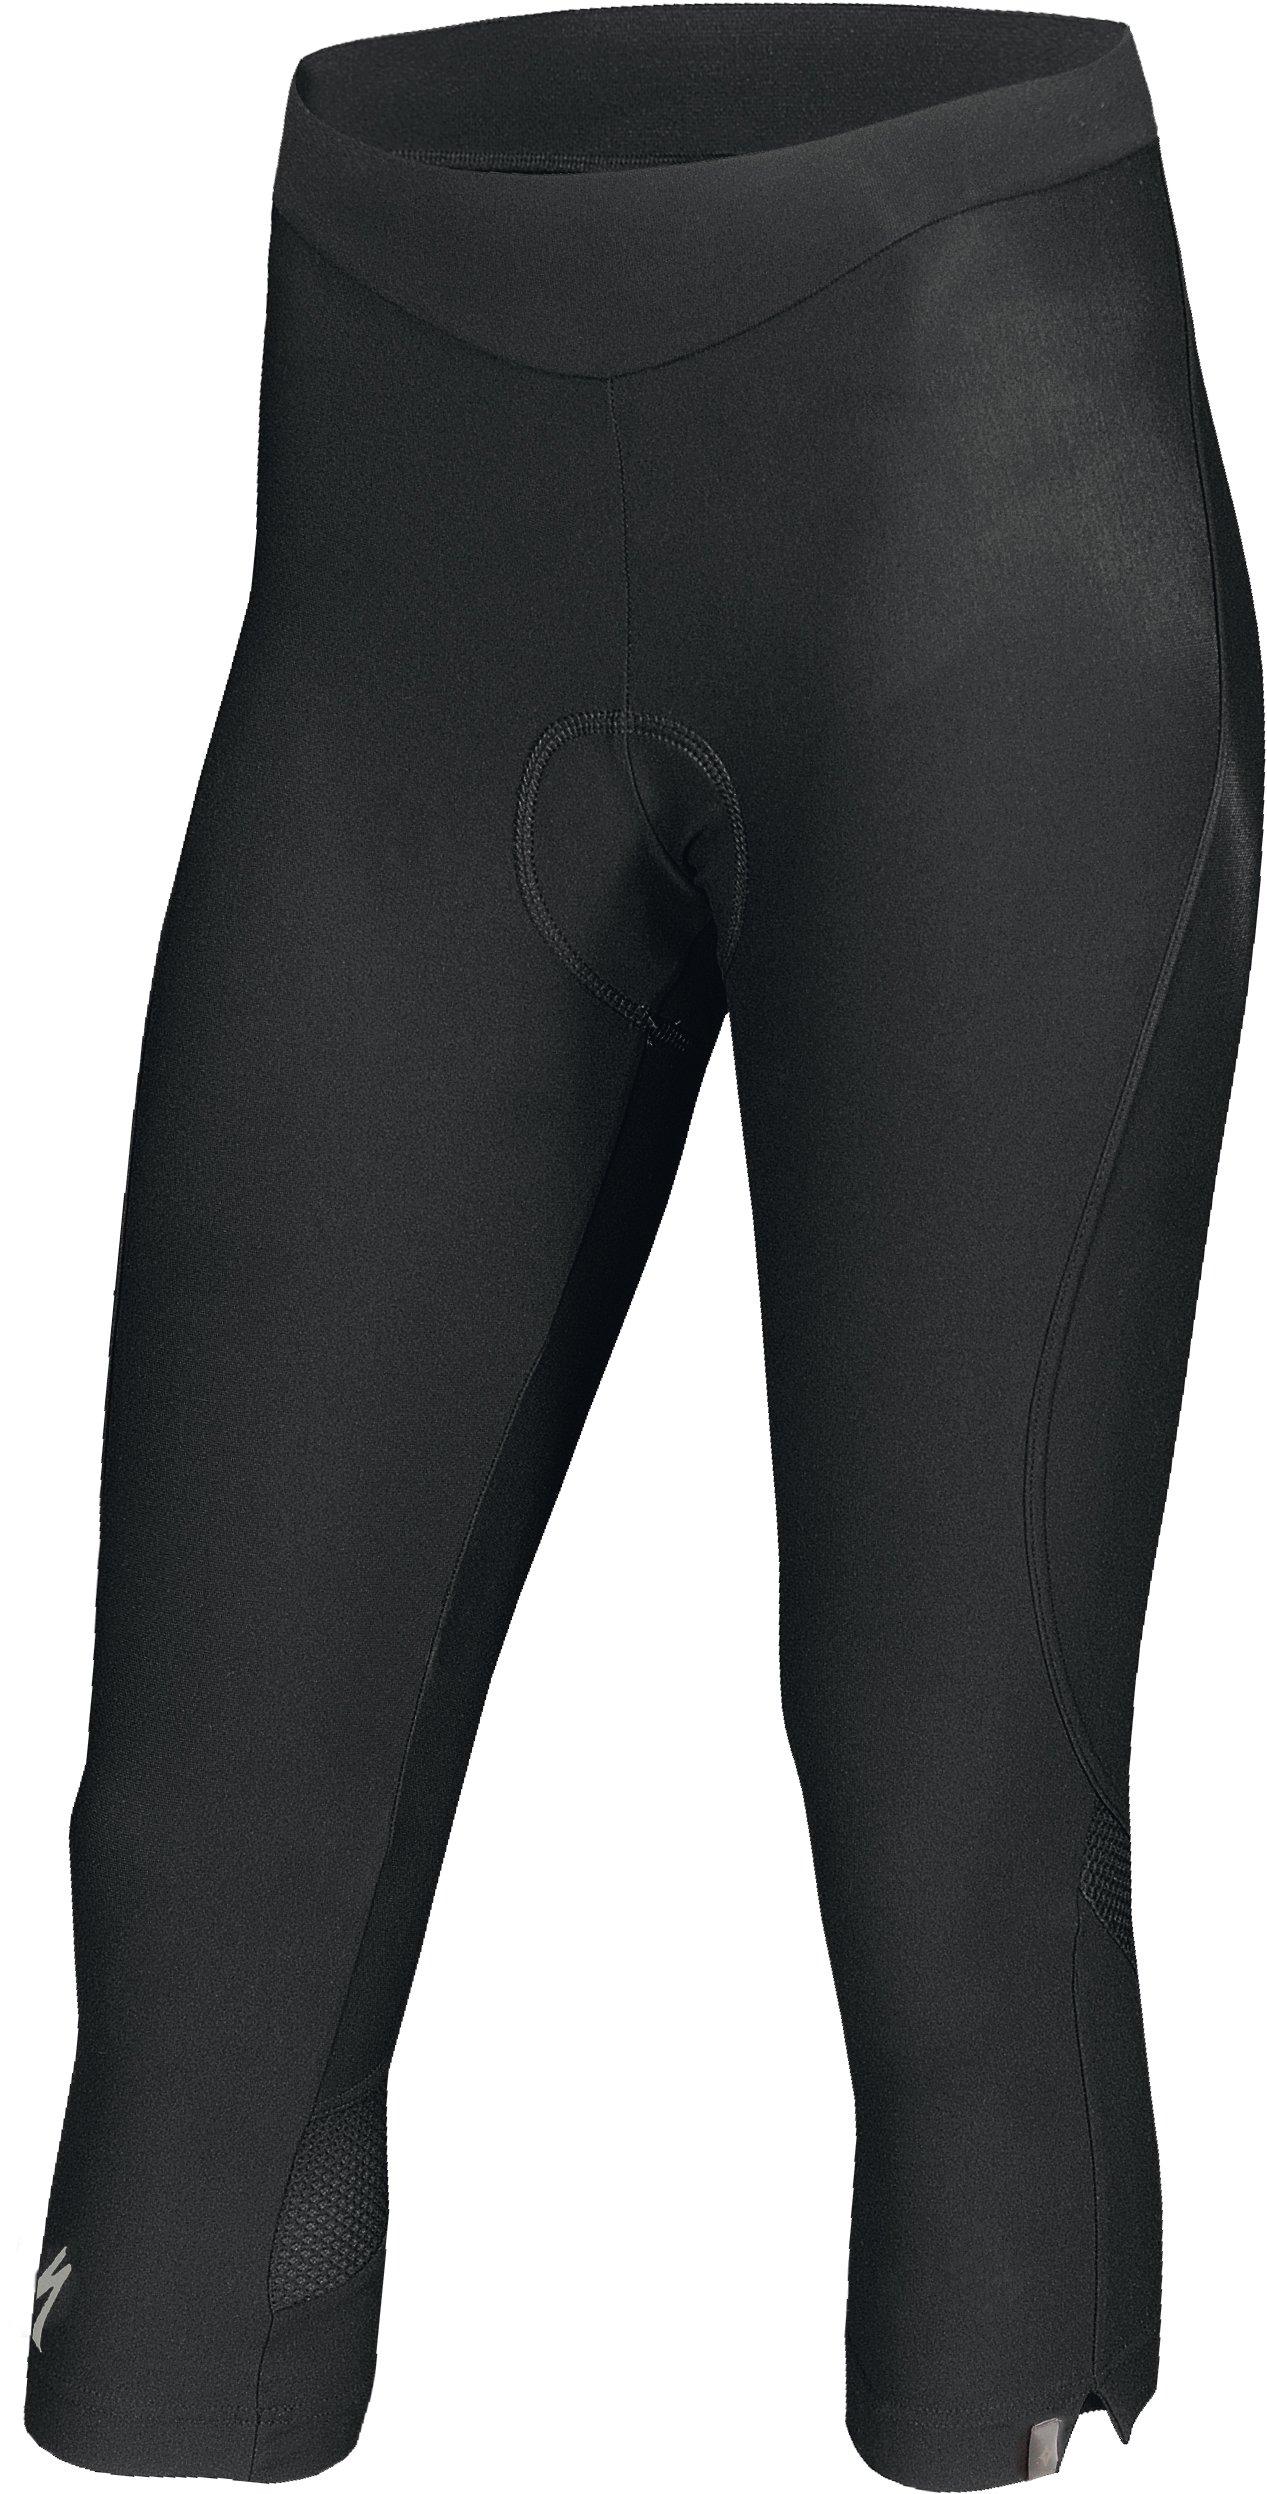 RBX Comp Women's cycling knickers